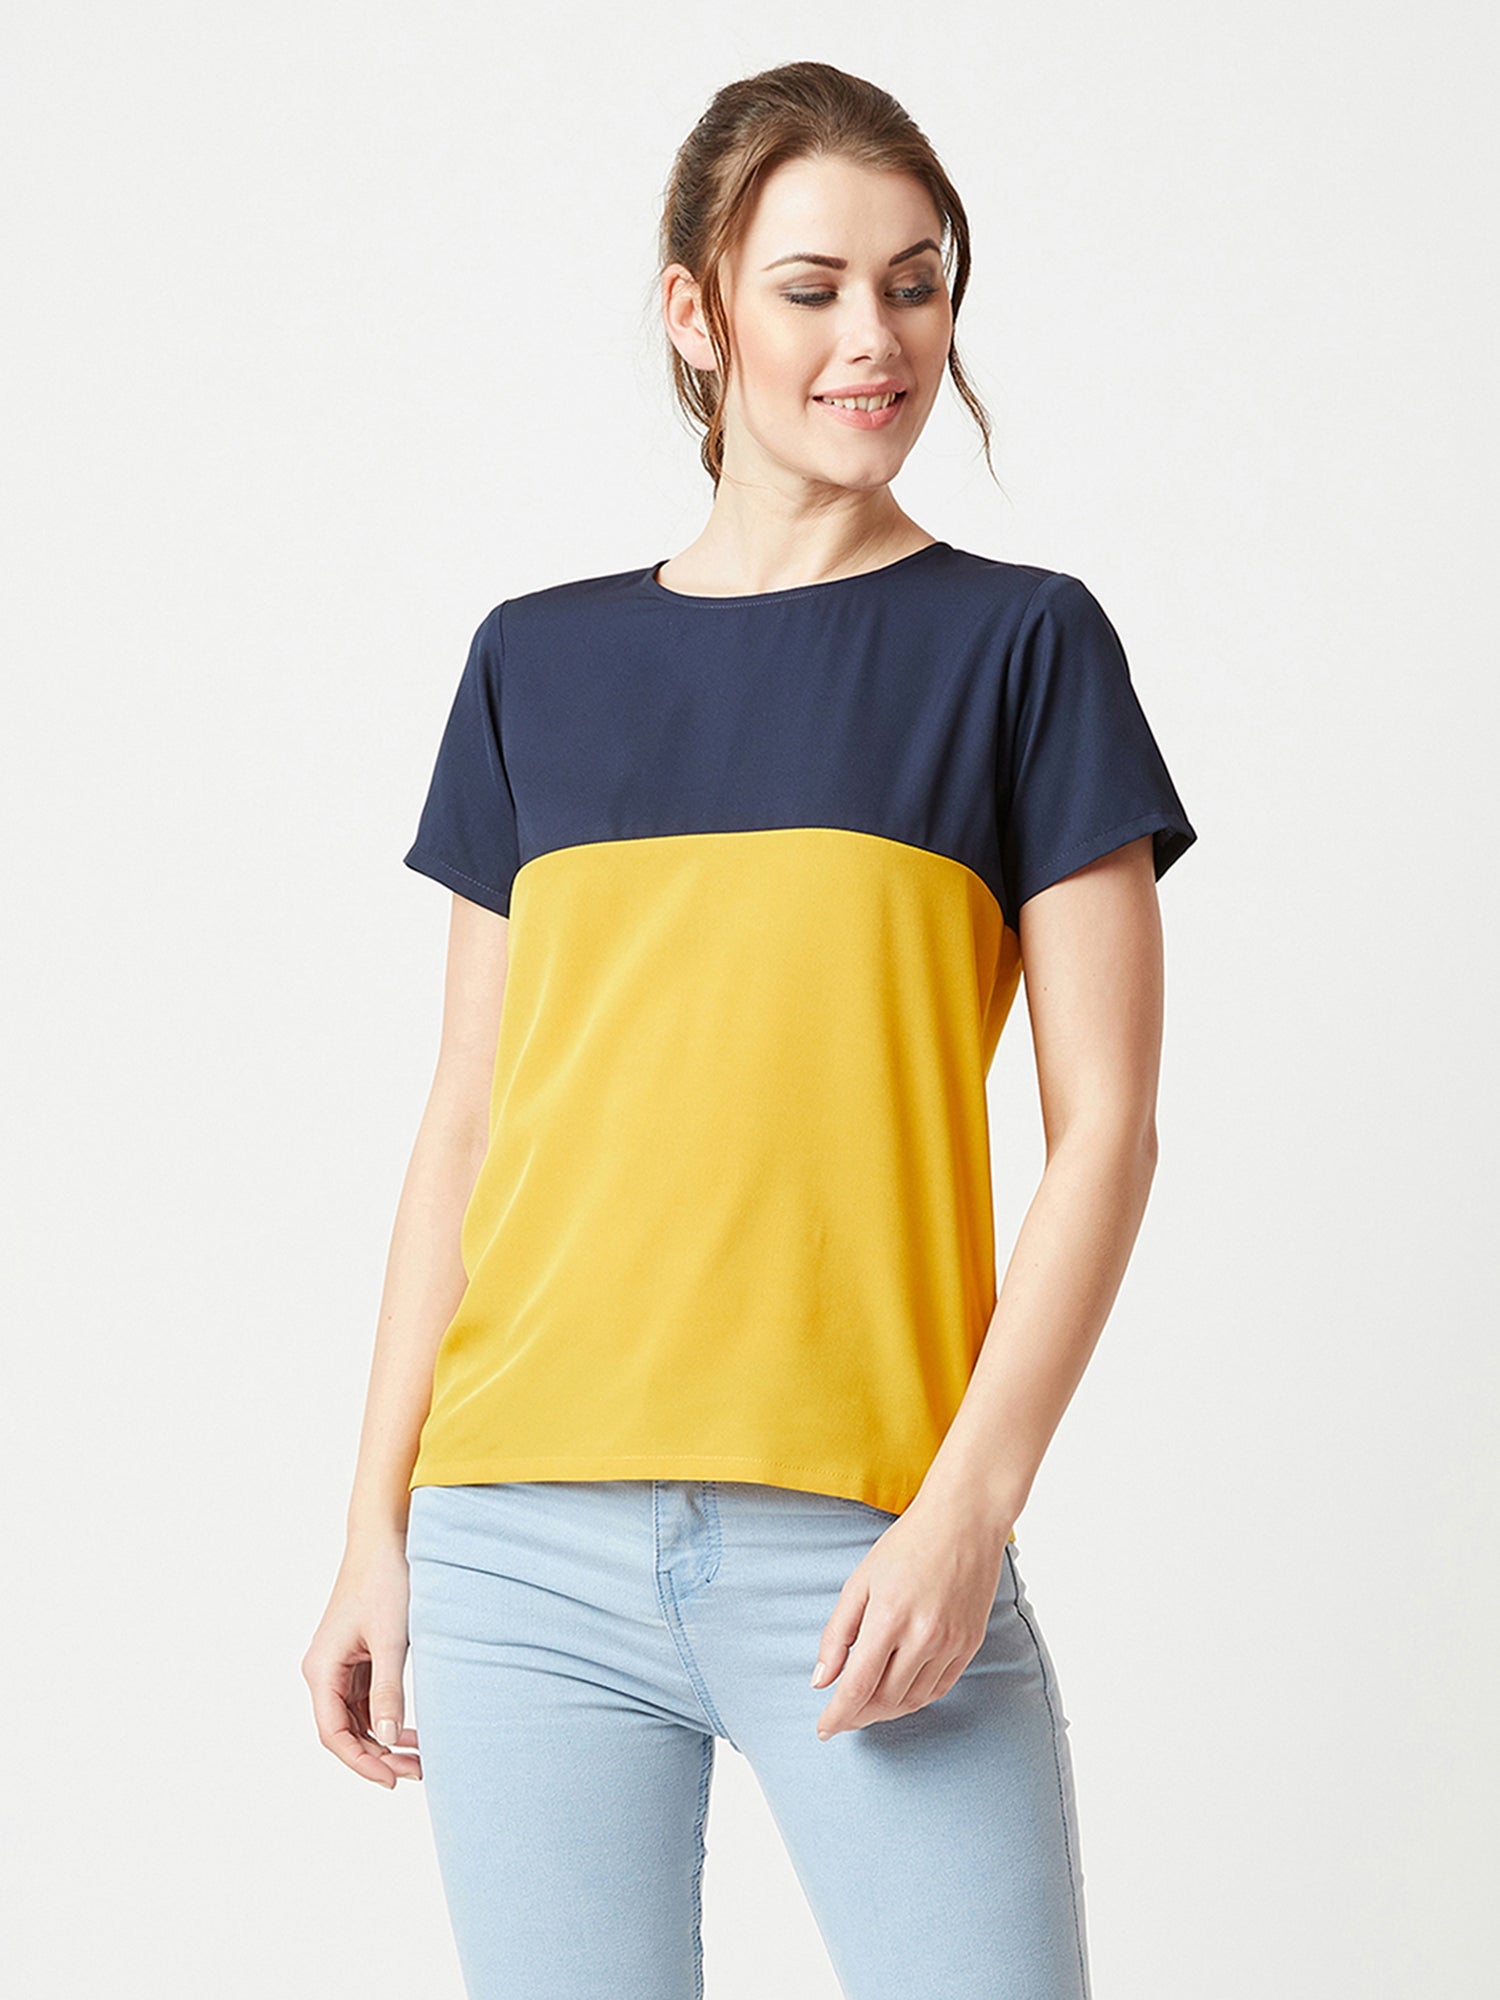 Multicolored With A Navy Blue Base Round Neck Short Sleeve Solid Color block Boxy Top